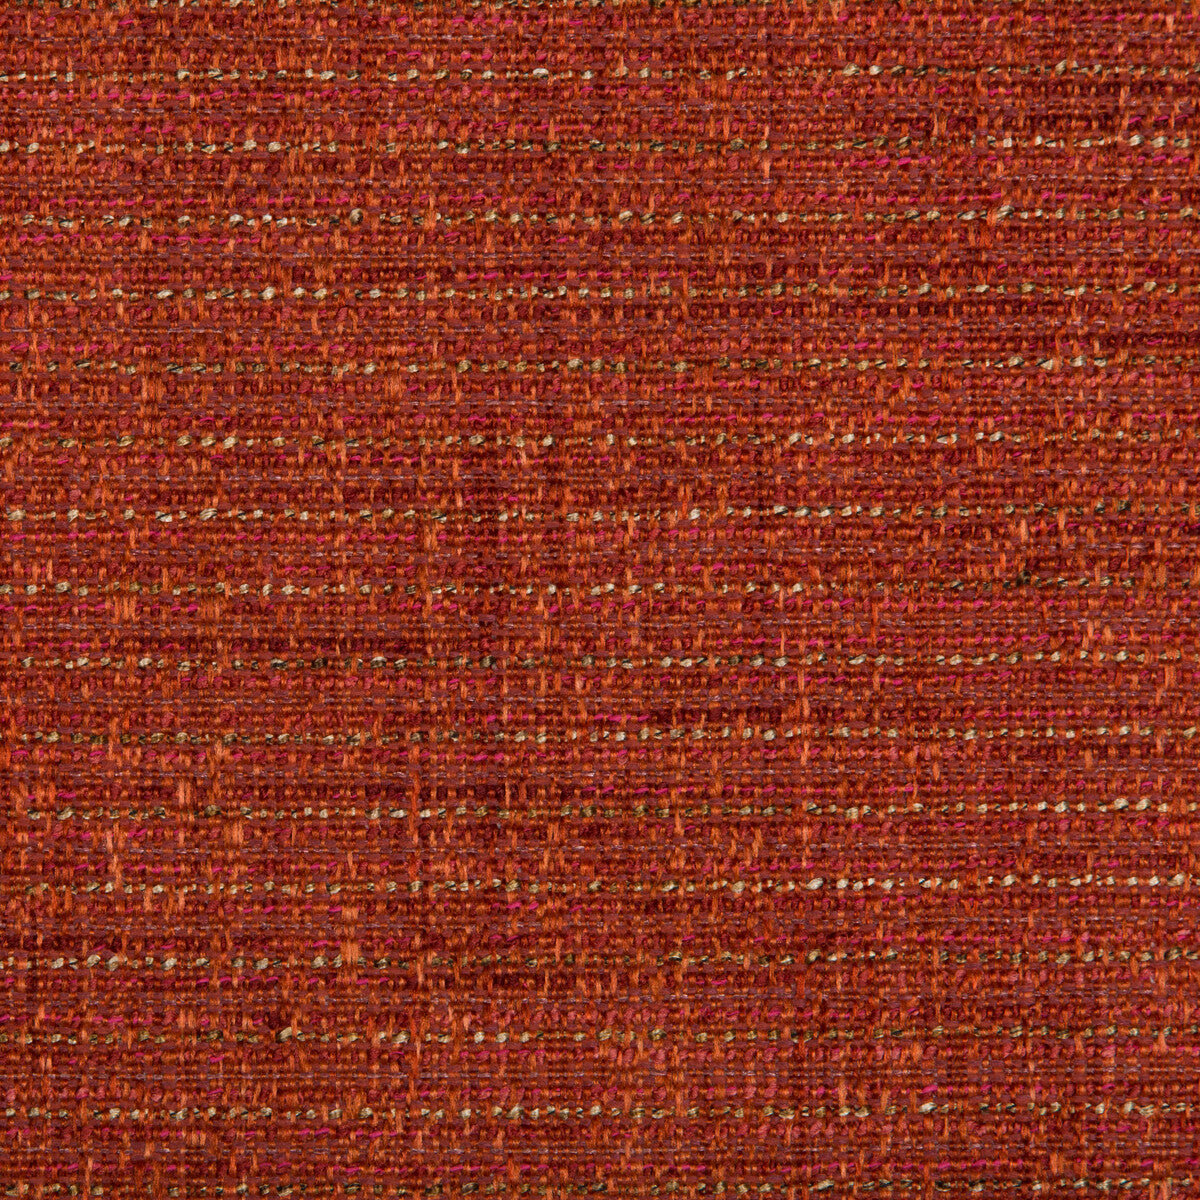 Kravet Contract fabric in 35410-24 color - pattern 35410.24.0 - by Kravet Contract in the Crypton Incase collection